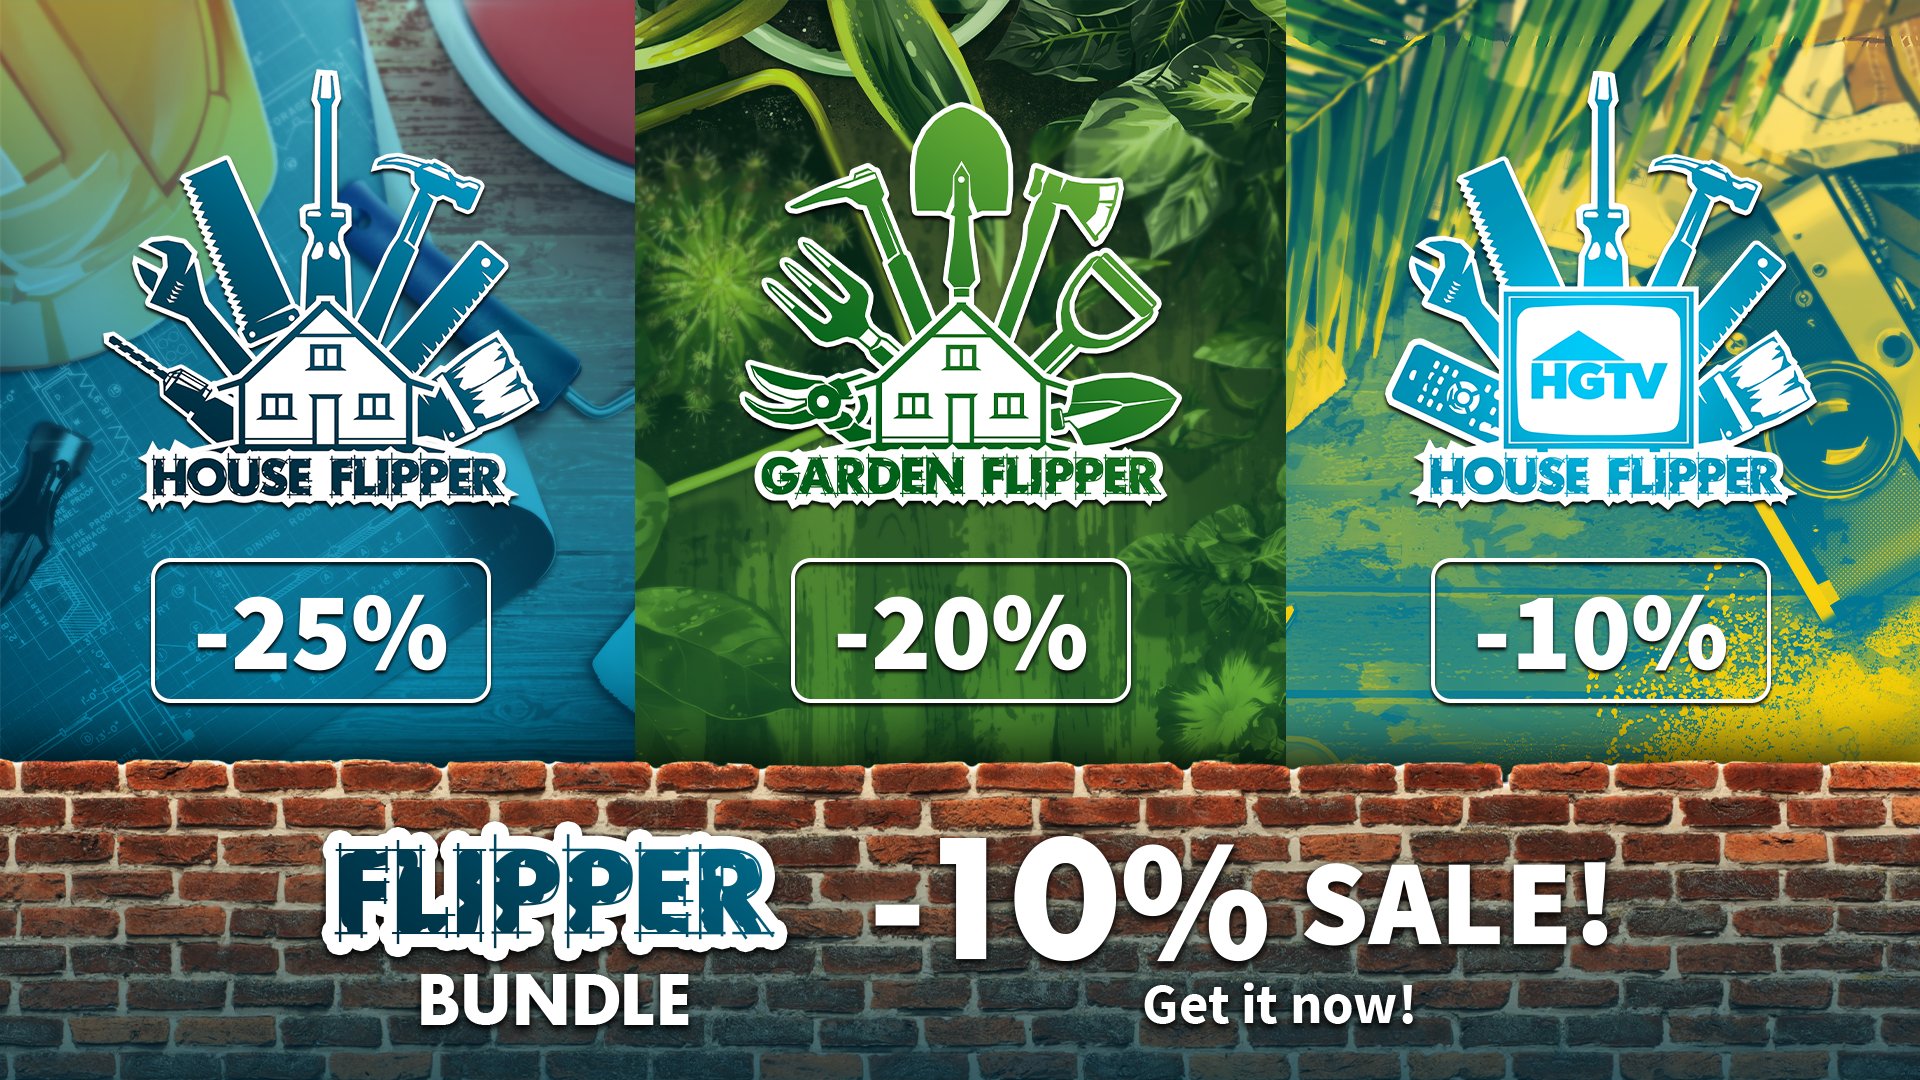 House Flipper on Twitter: "We're going crazy with the discounts on Steam to celebrate the of HGTV DLC!! ✊ - HGTV DLC is on a launch discount. - Garden Flipper